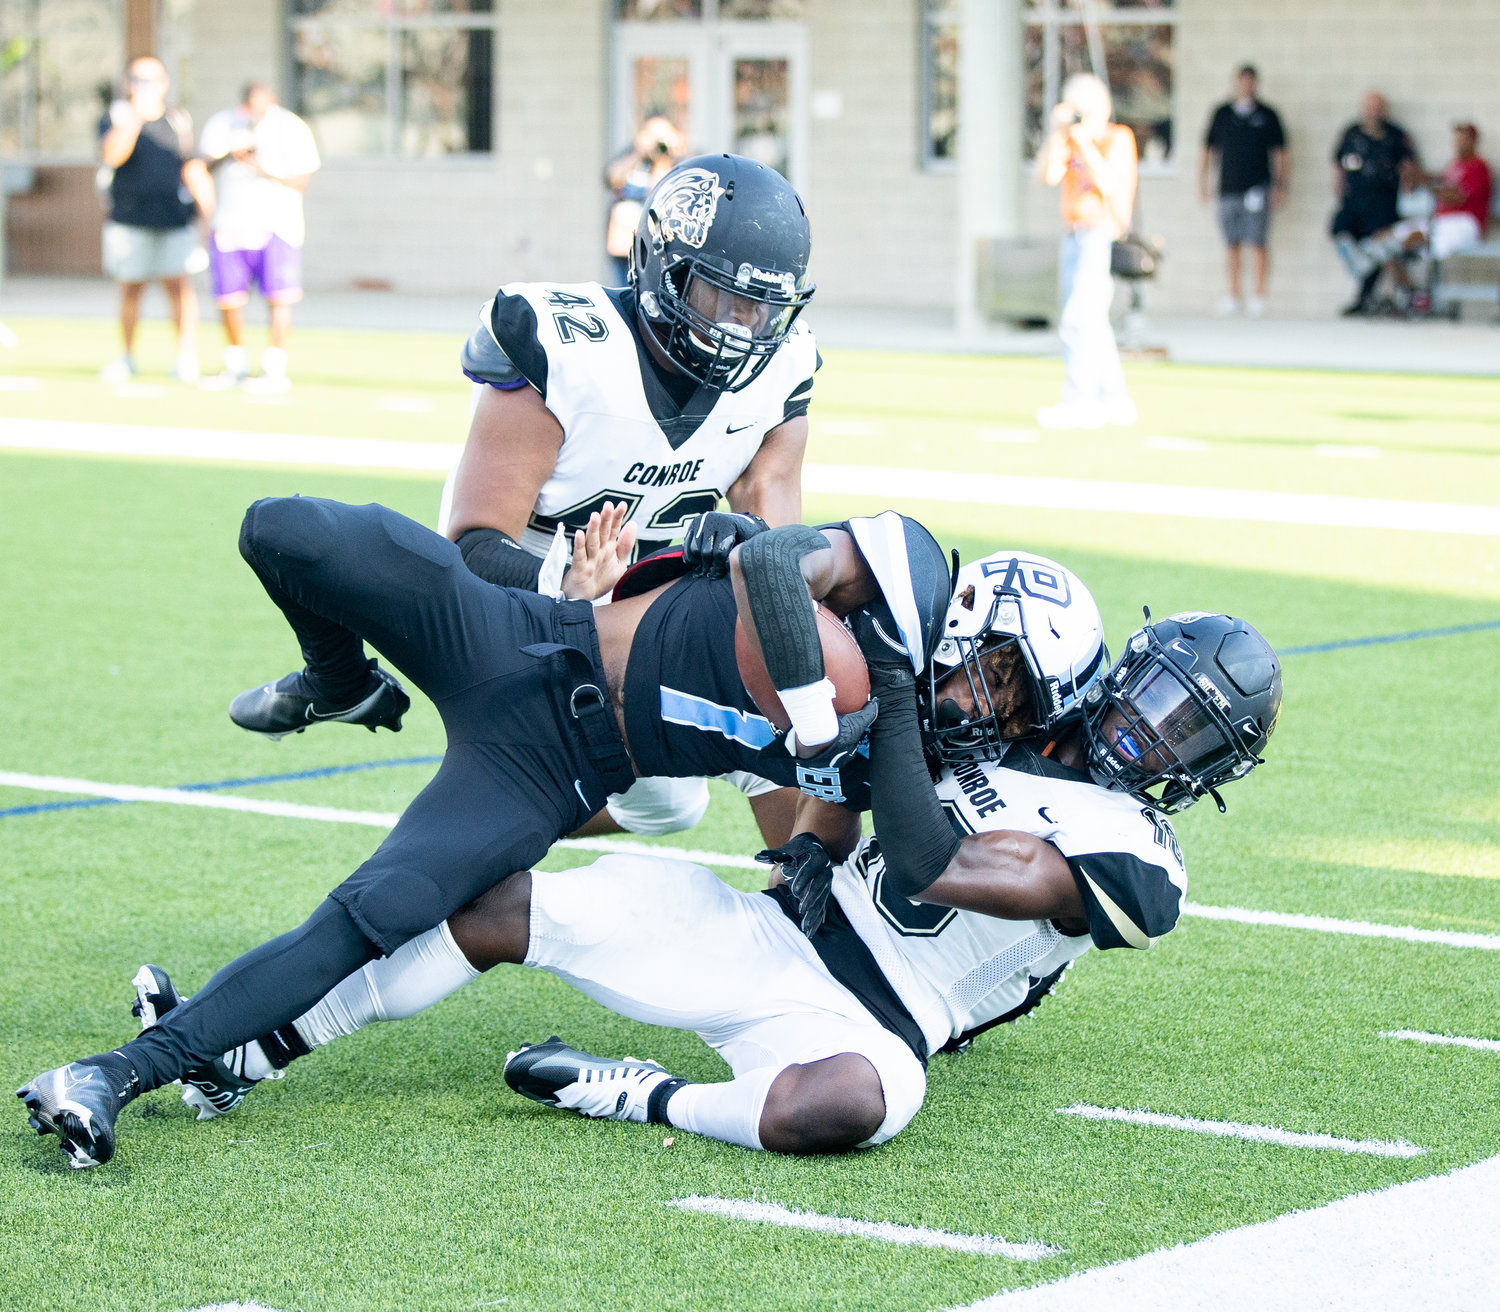 Paetow Derrick Johnson runs over a defender during Friday’s game against Conroe at Legacy Stadium.